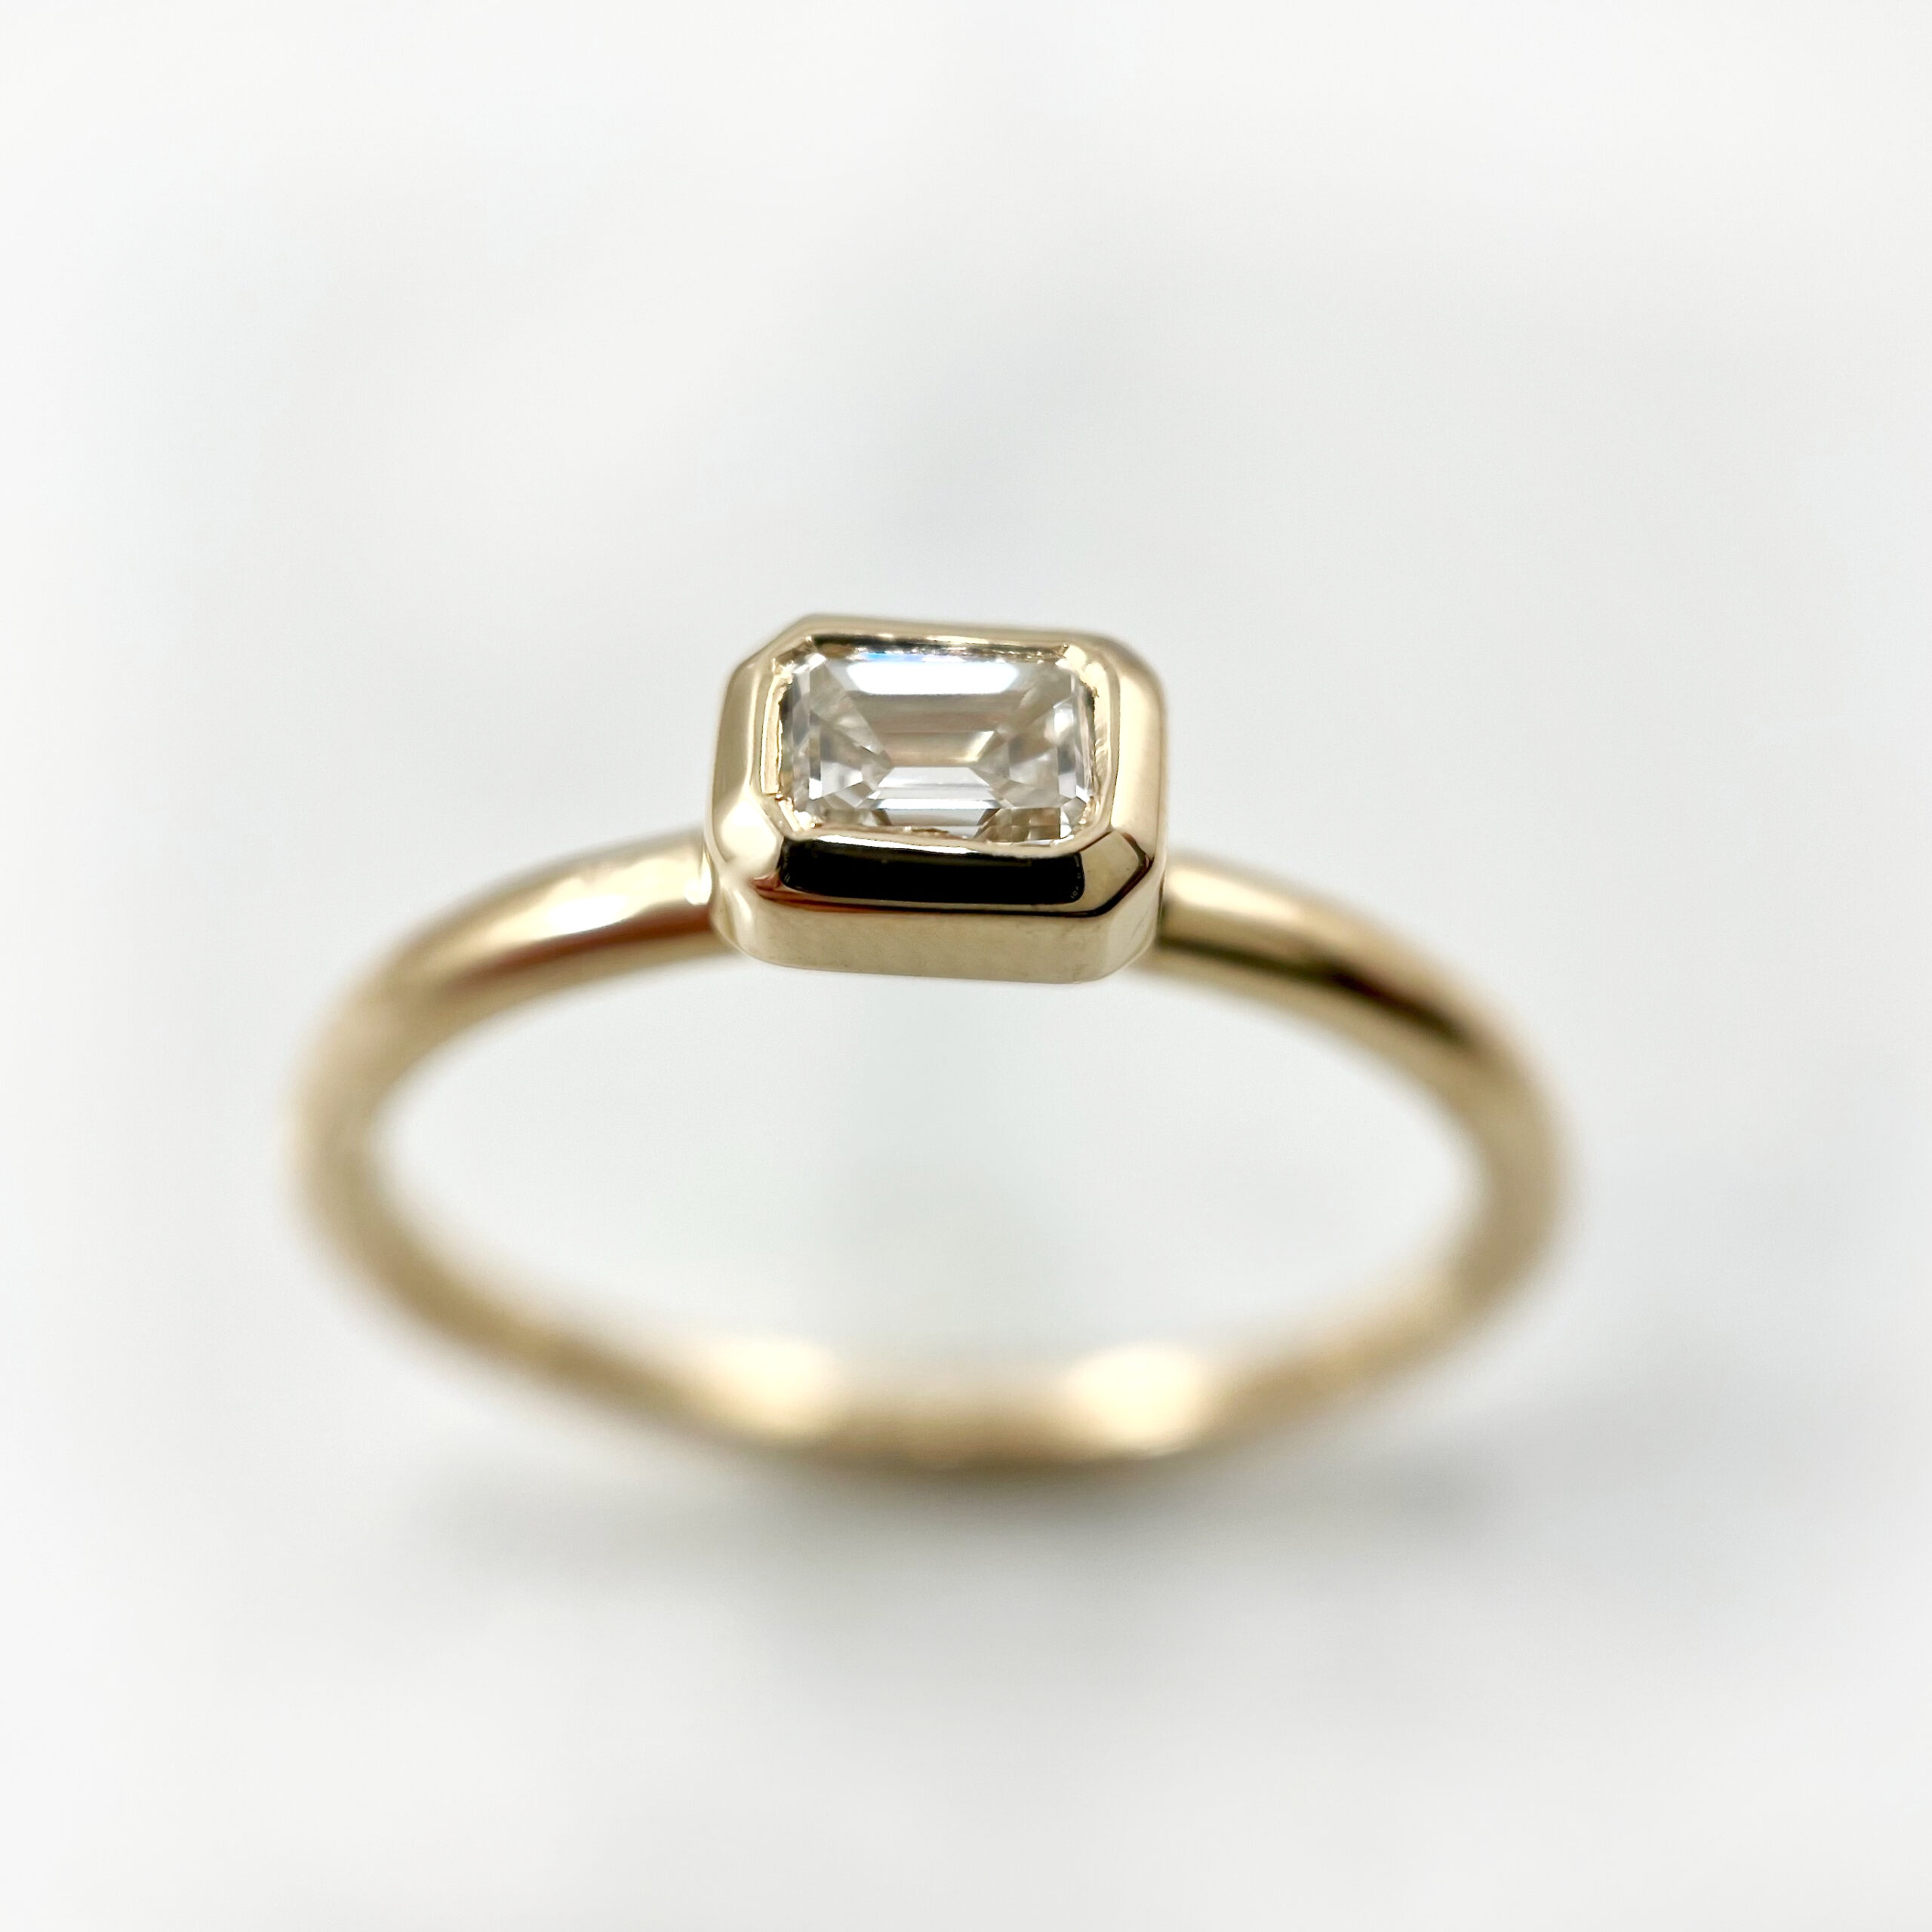 Emerald Cut Diamond Stacking Ring- SOLD - Sholdt Jewelry Design